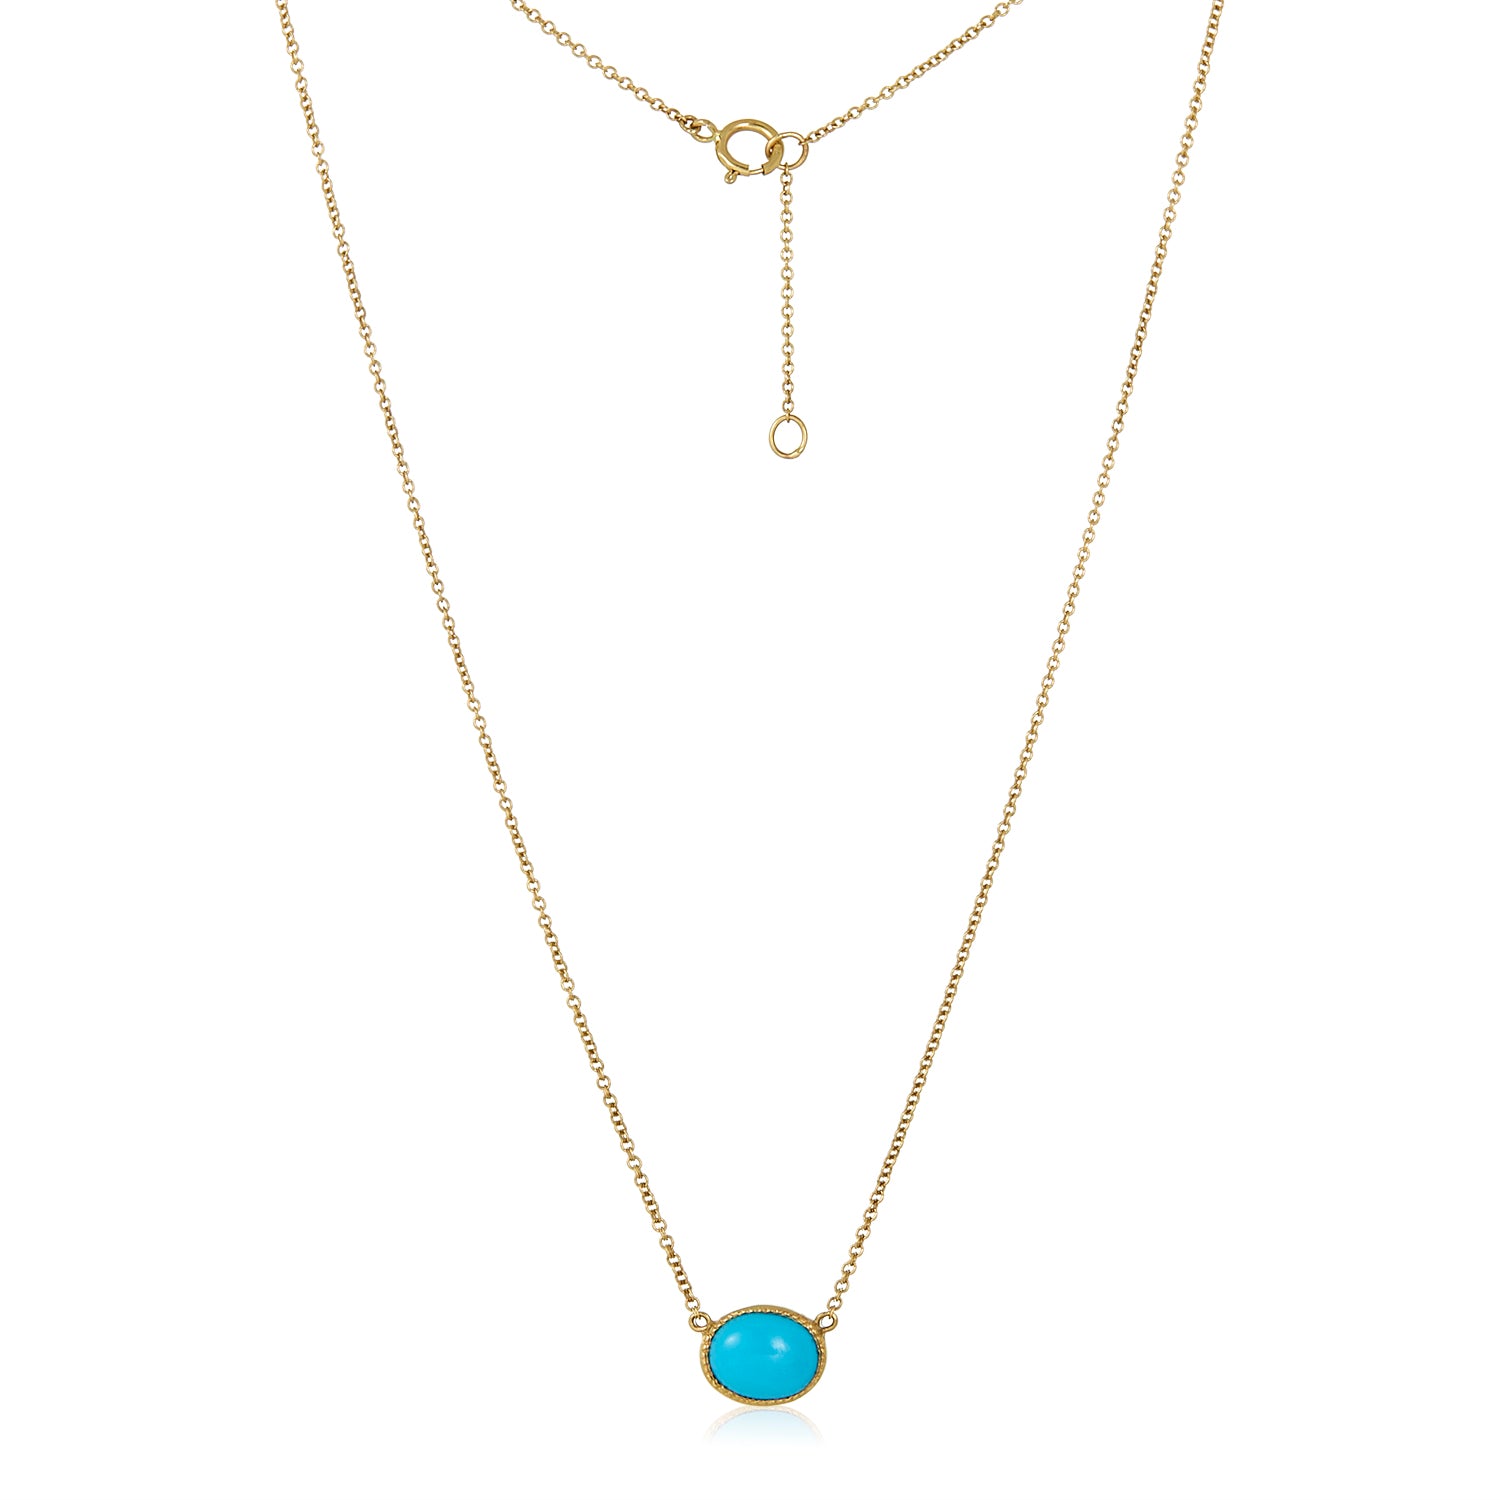 Petite Oval Turquoise Necklace in 14k